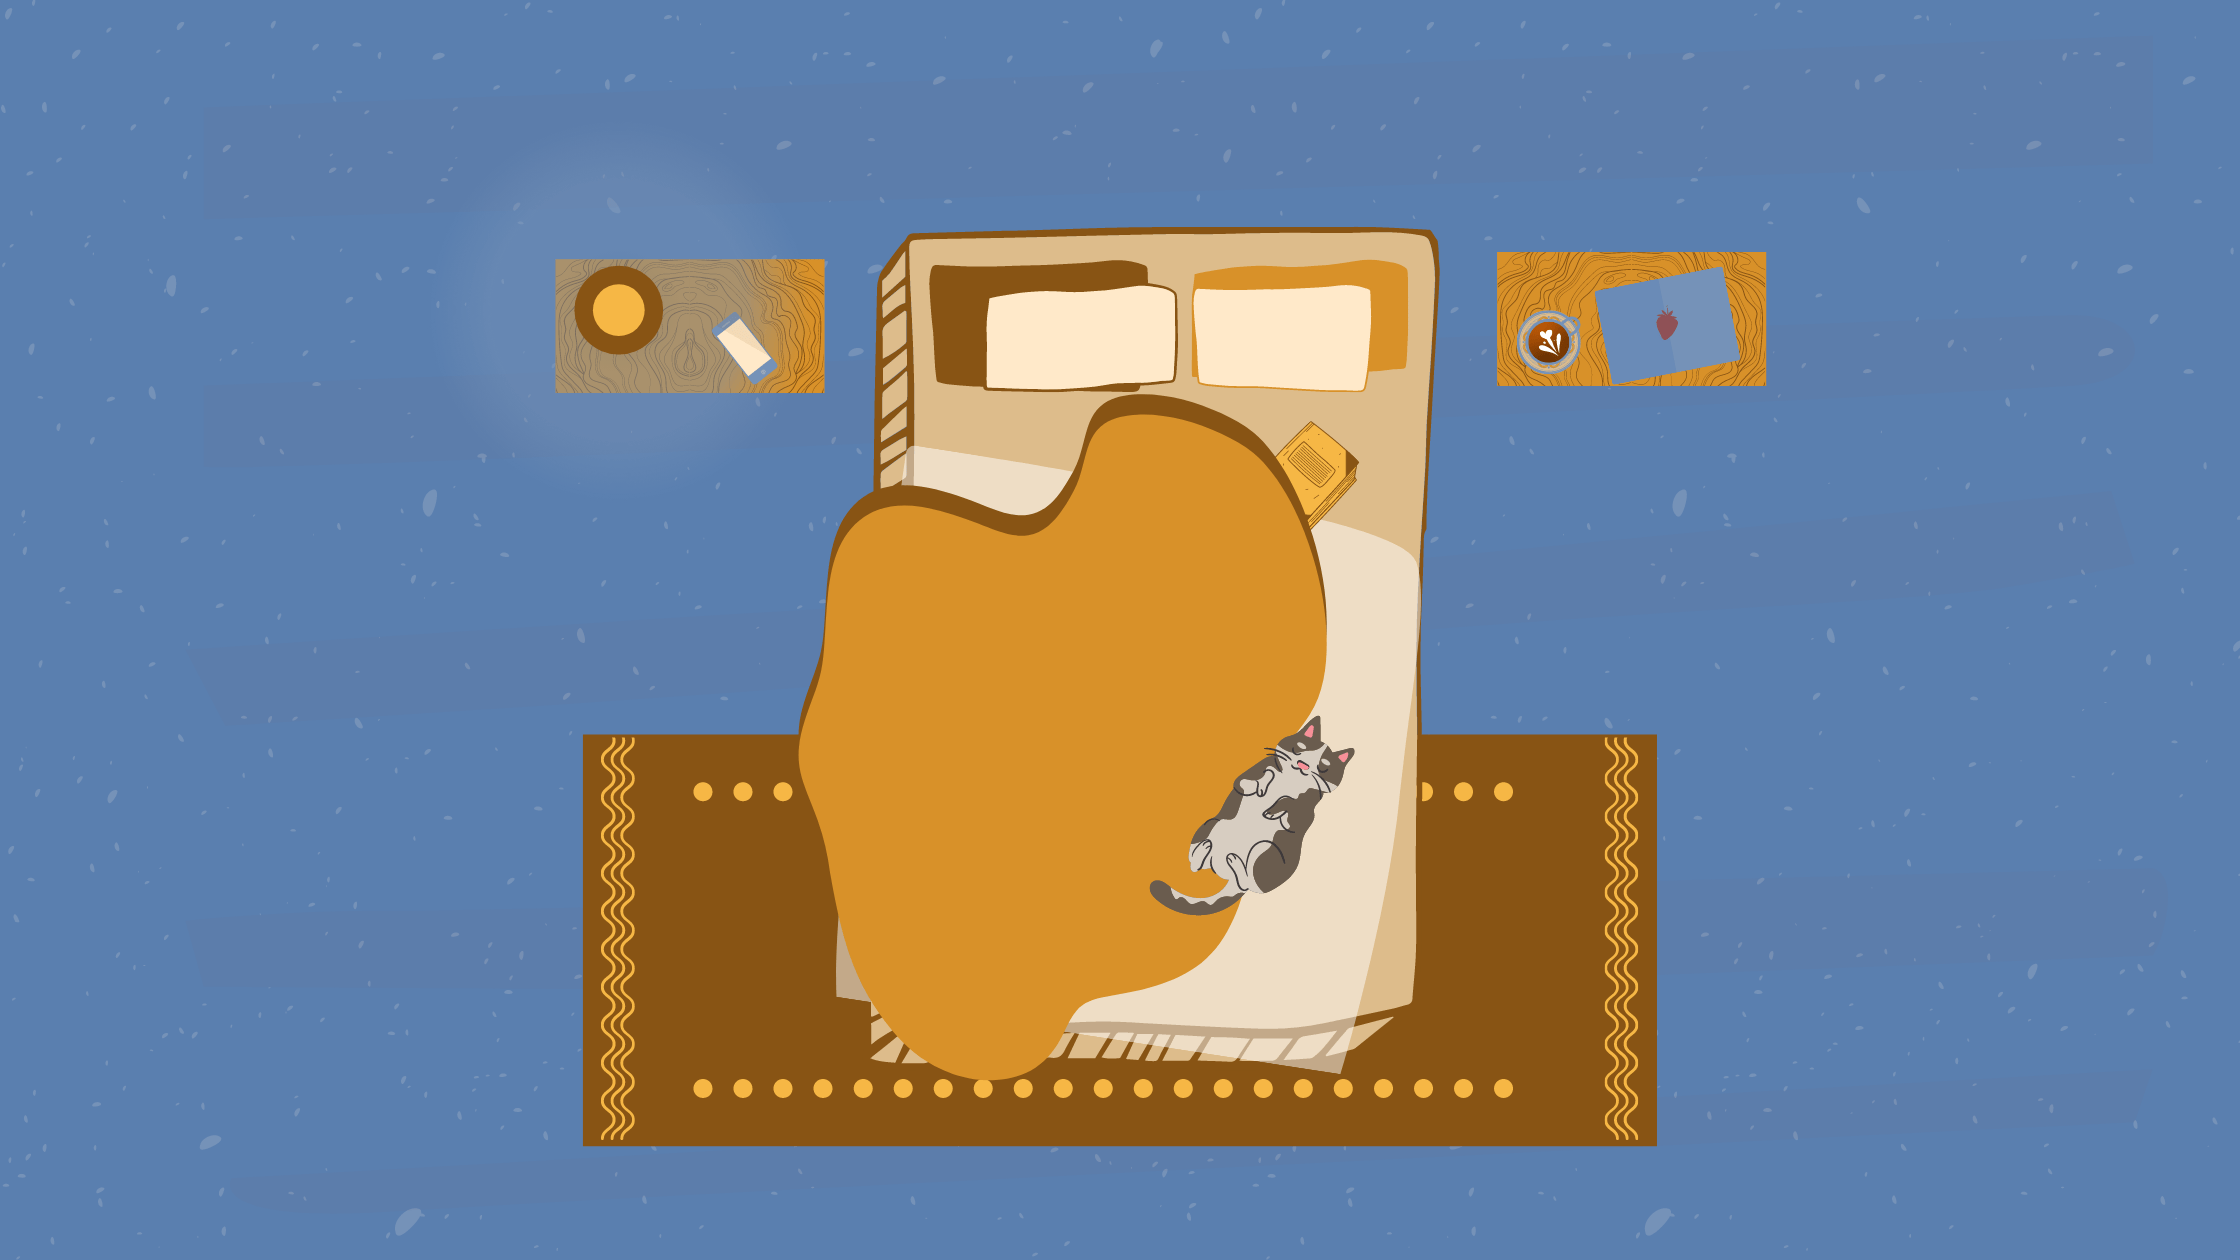 An illustration of the author's cat, Pinky, lounges on an orange bed.